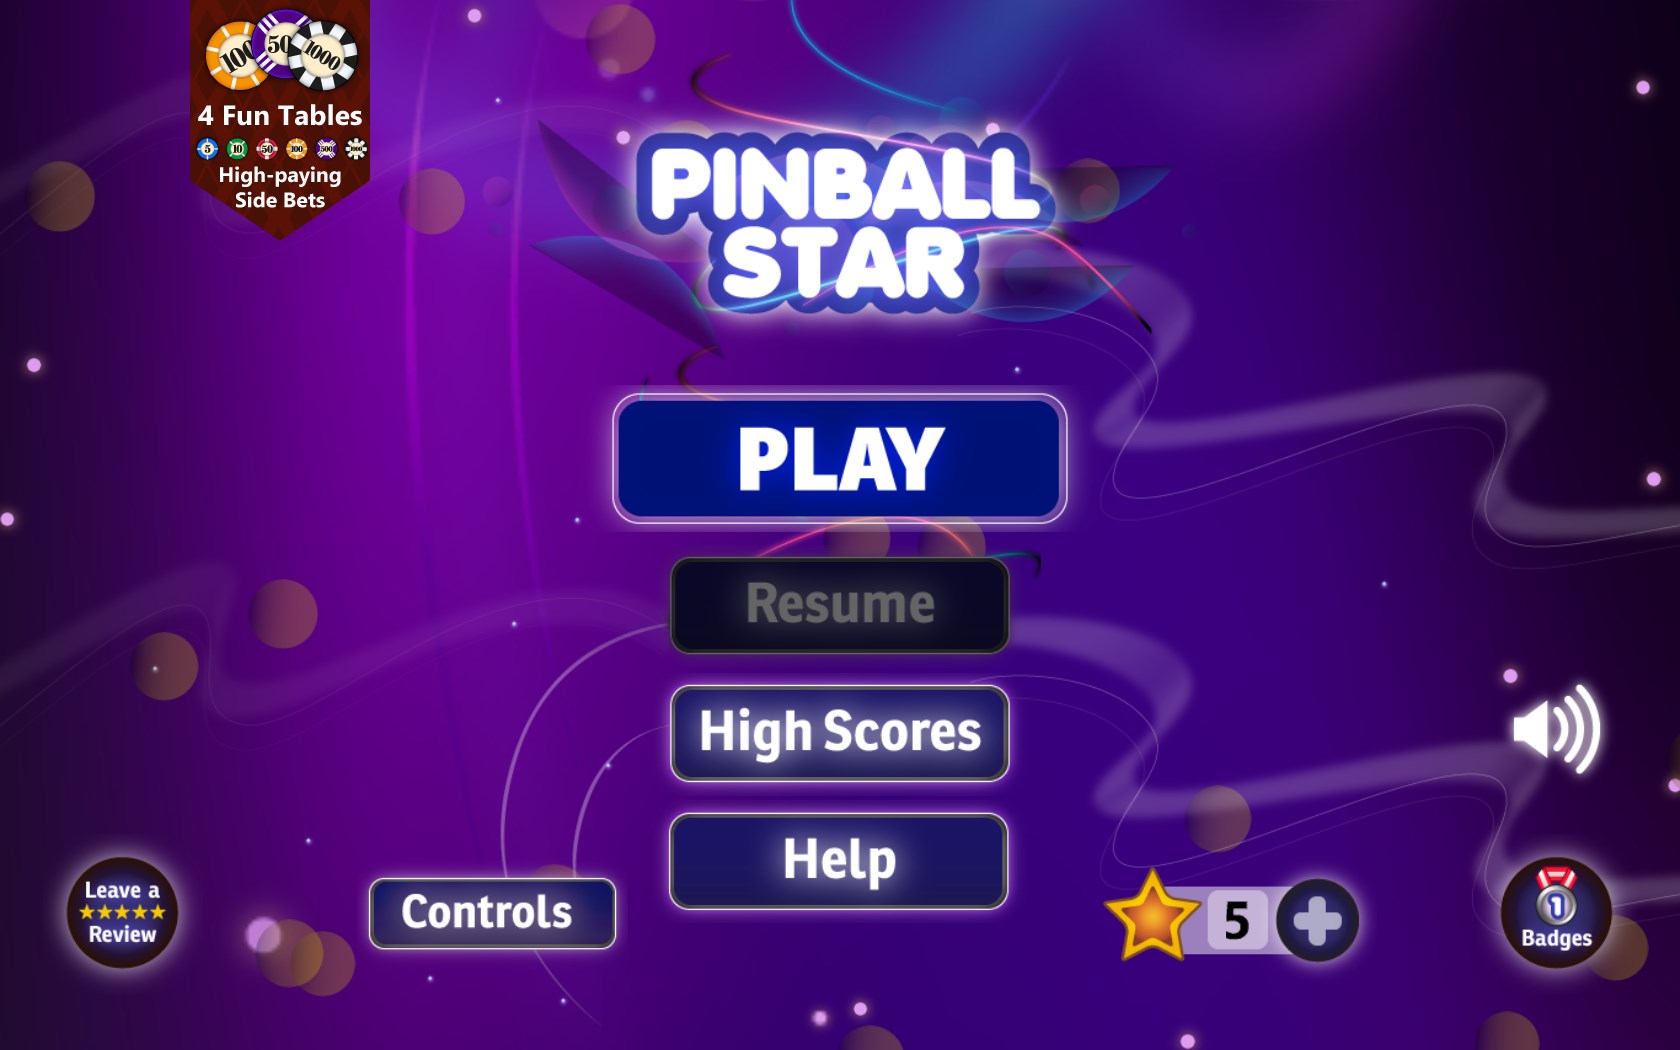 download the new Pinball Star